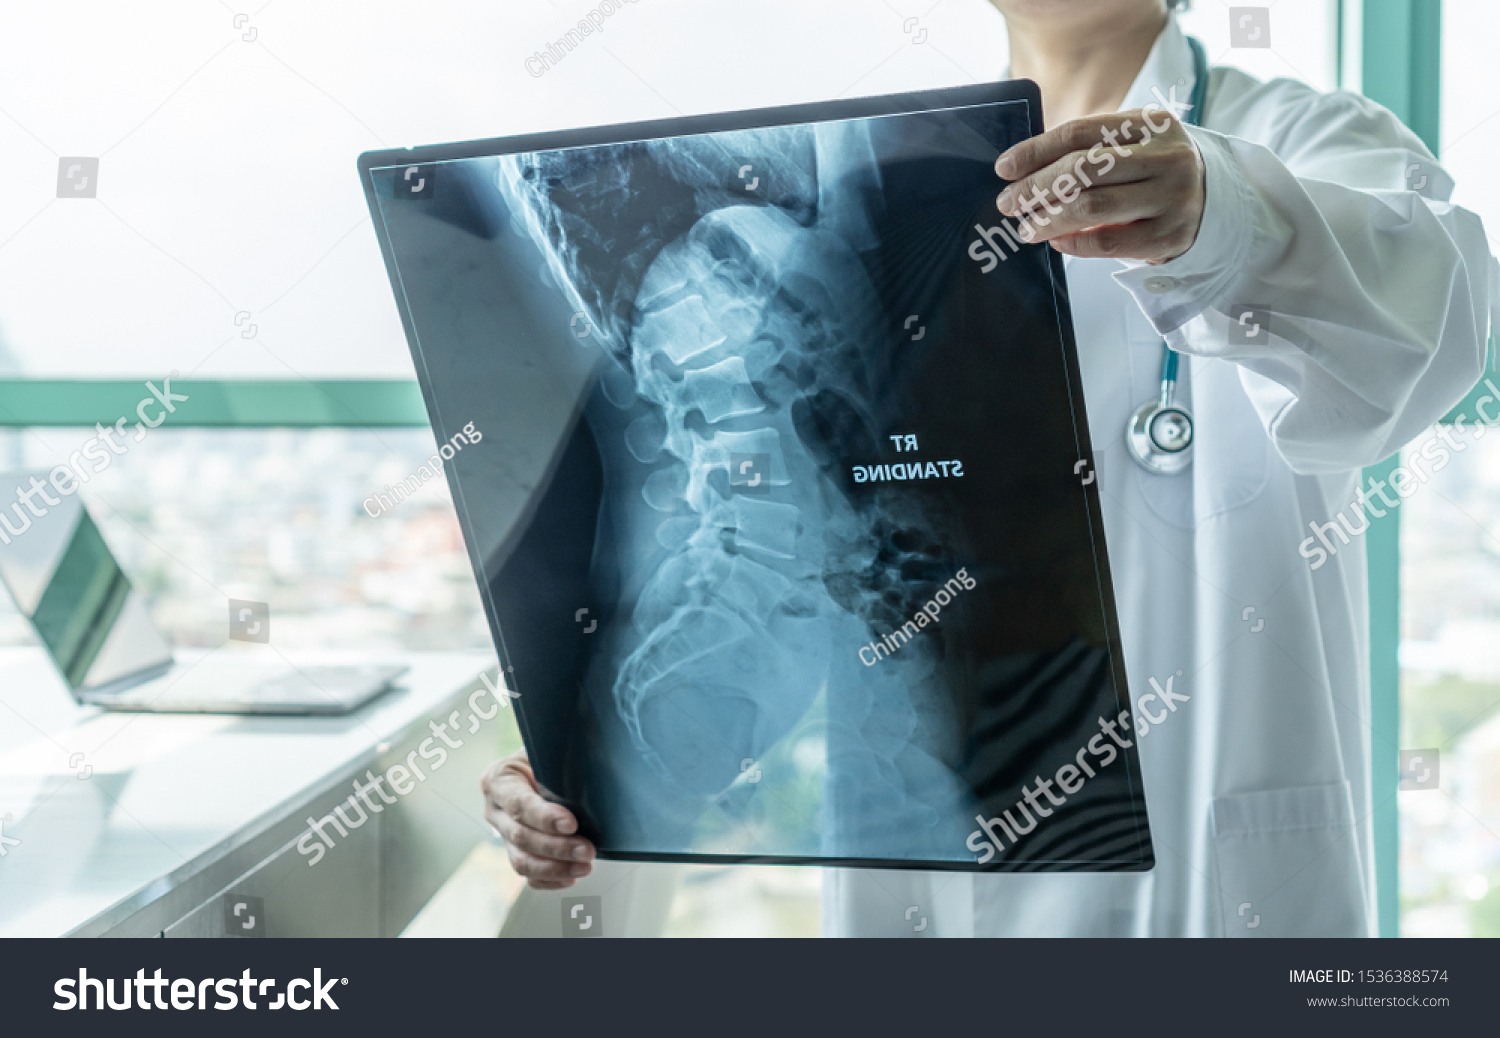 Surgical doctor looking at radiological spinal x-ray film for medical diagnosis on patient’s health on spine disease, bone cancer illness, spinal muscular atrophy, medical healthcare concept #1536388574